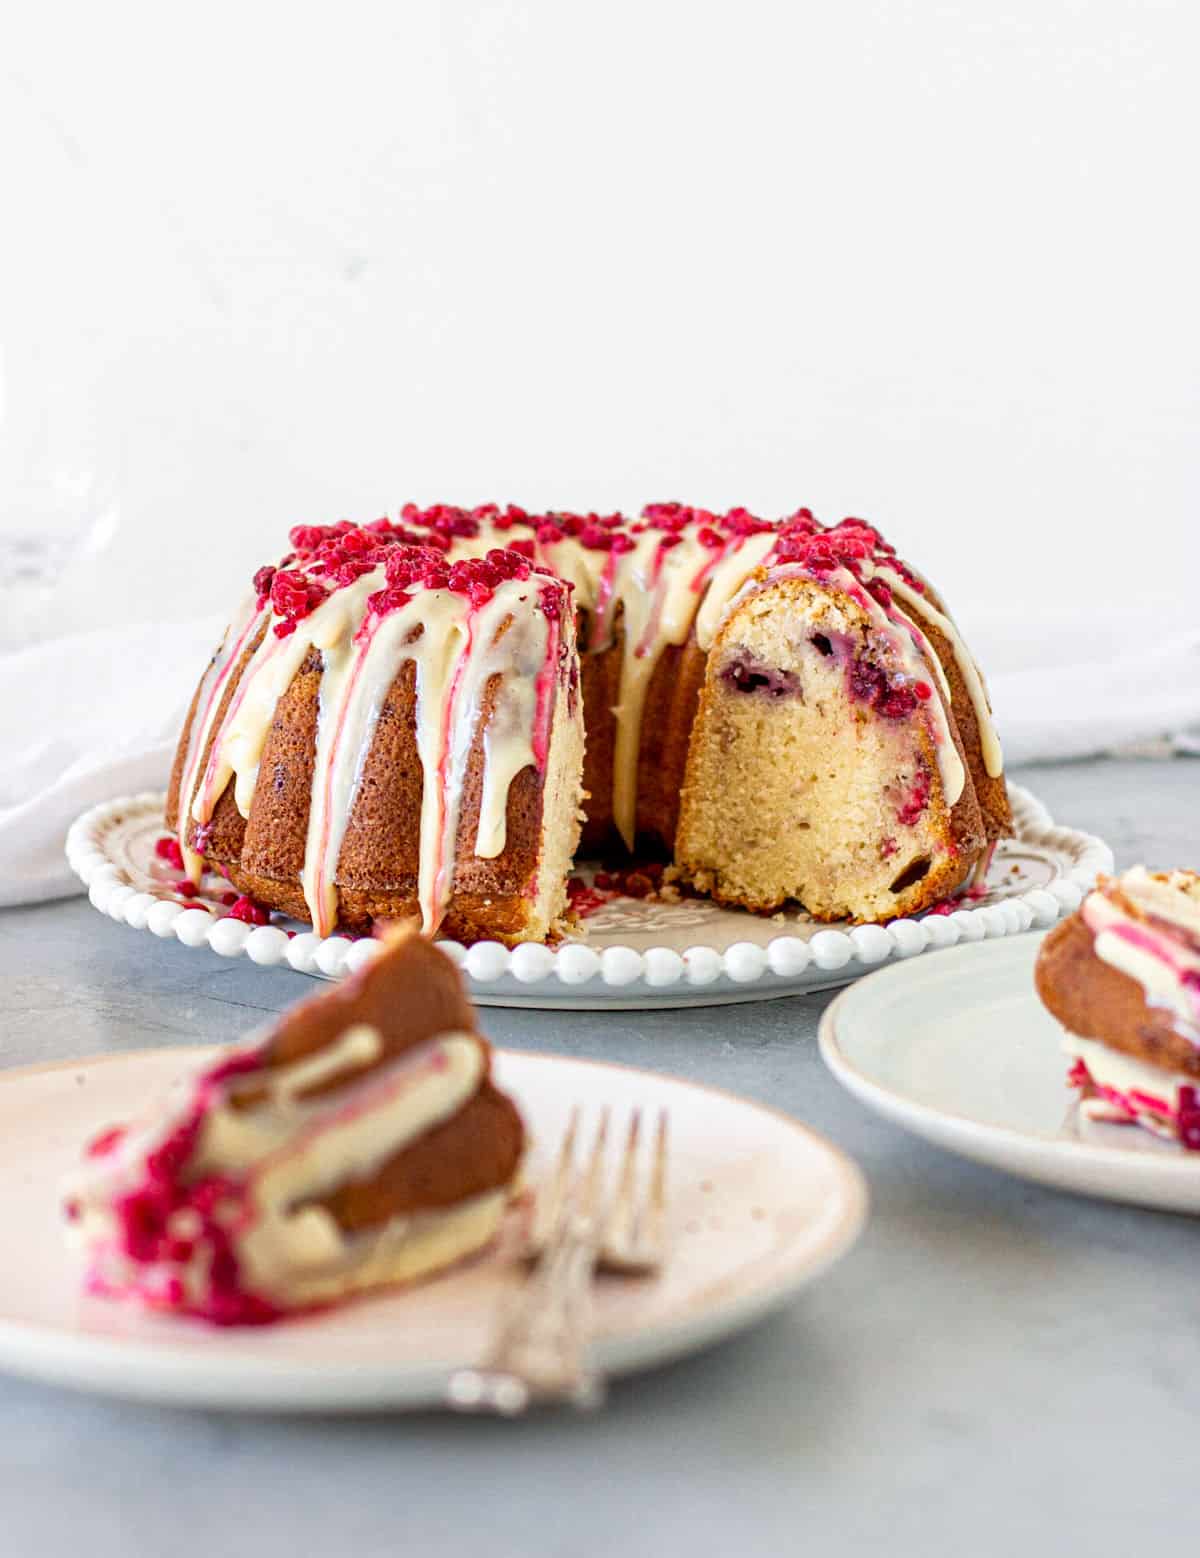 White chocolate raspberry bundt cake on white plate, slice on another plate, grey background